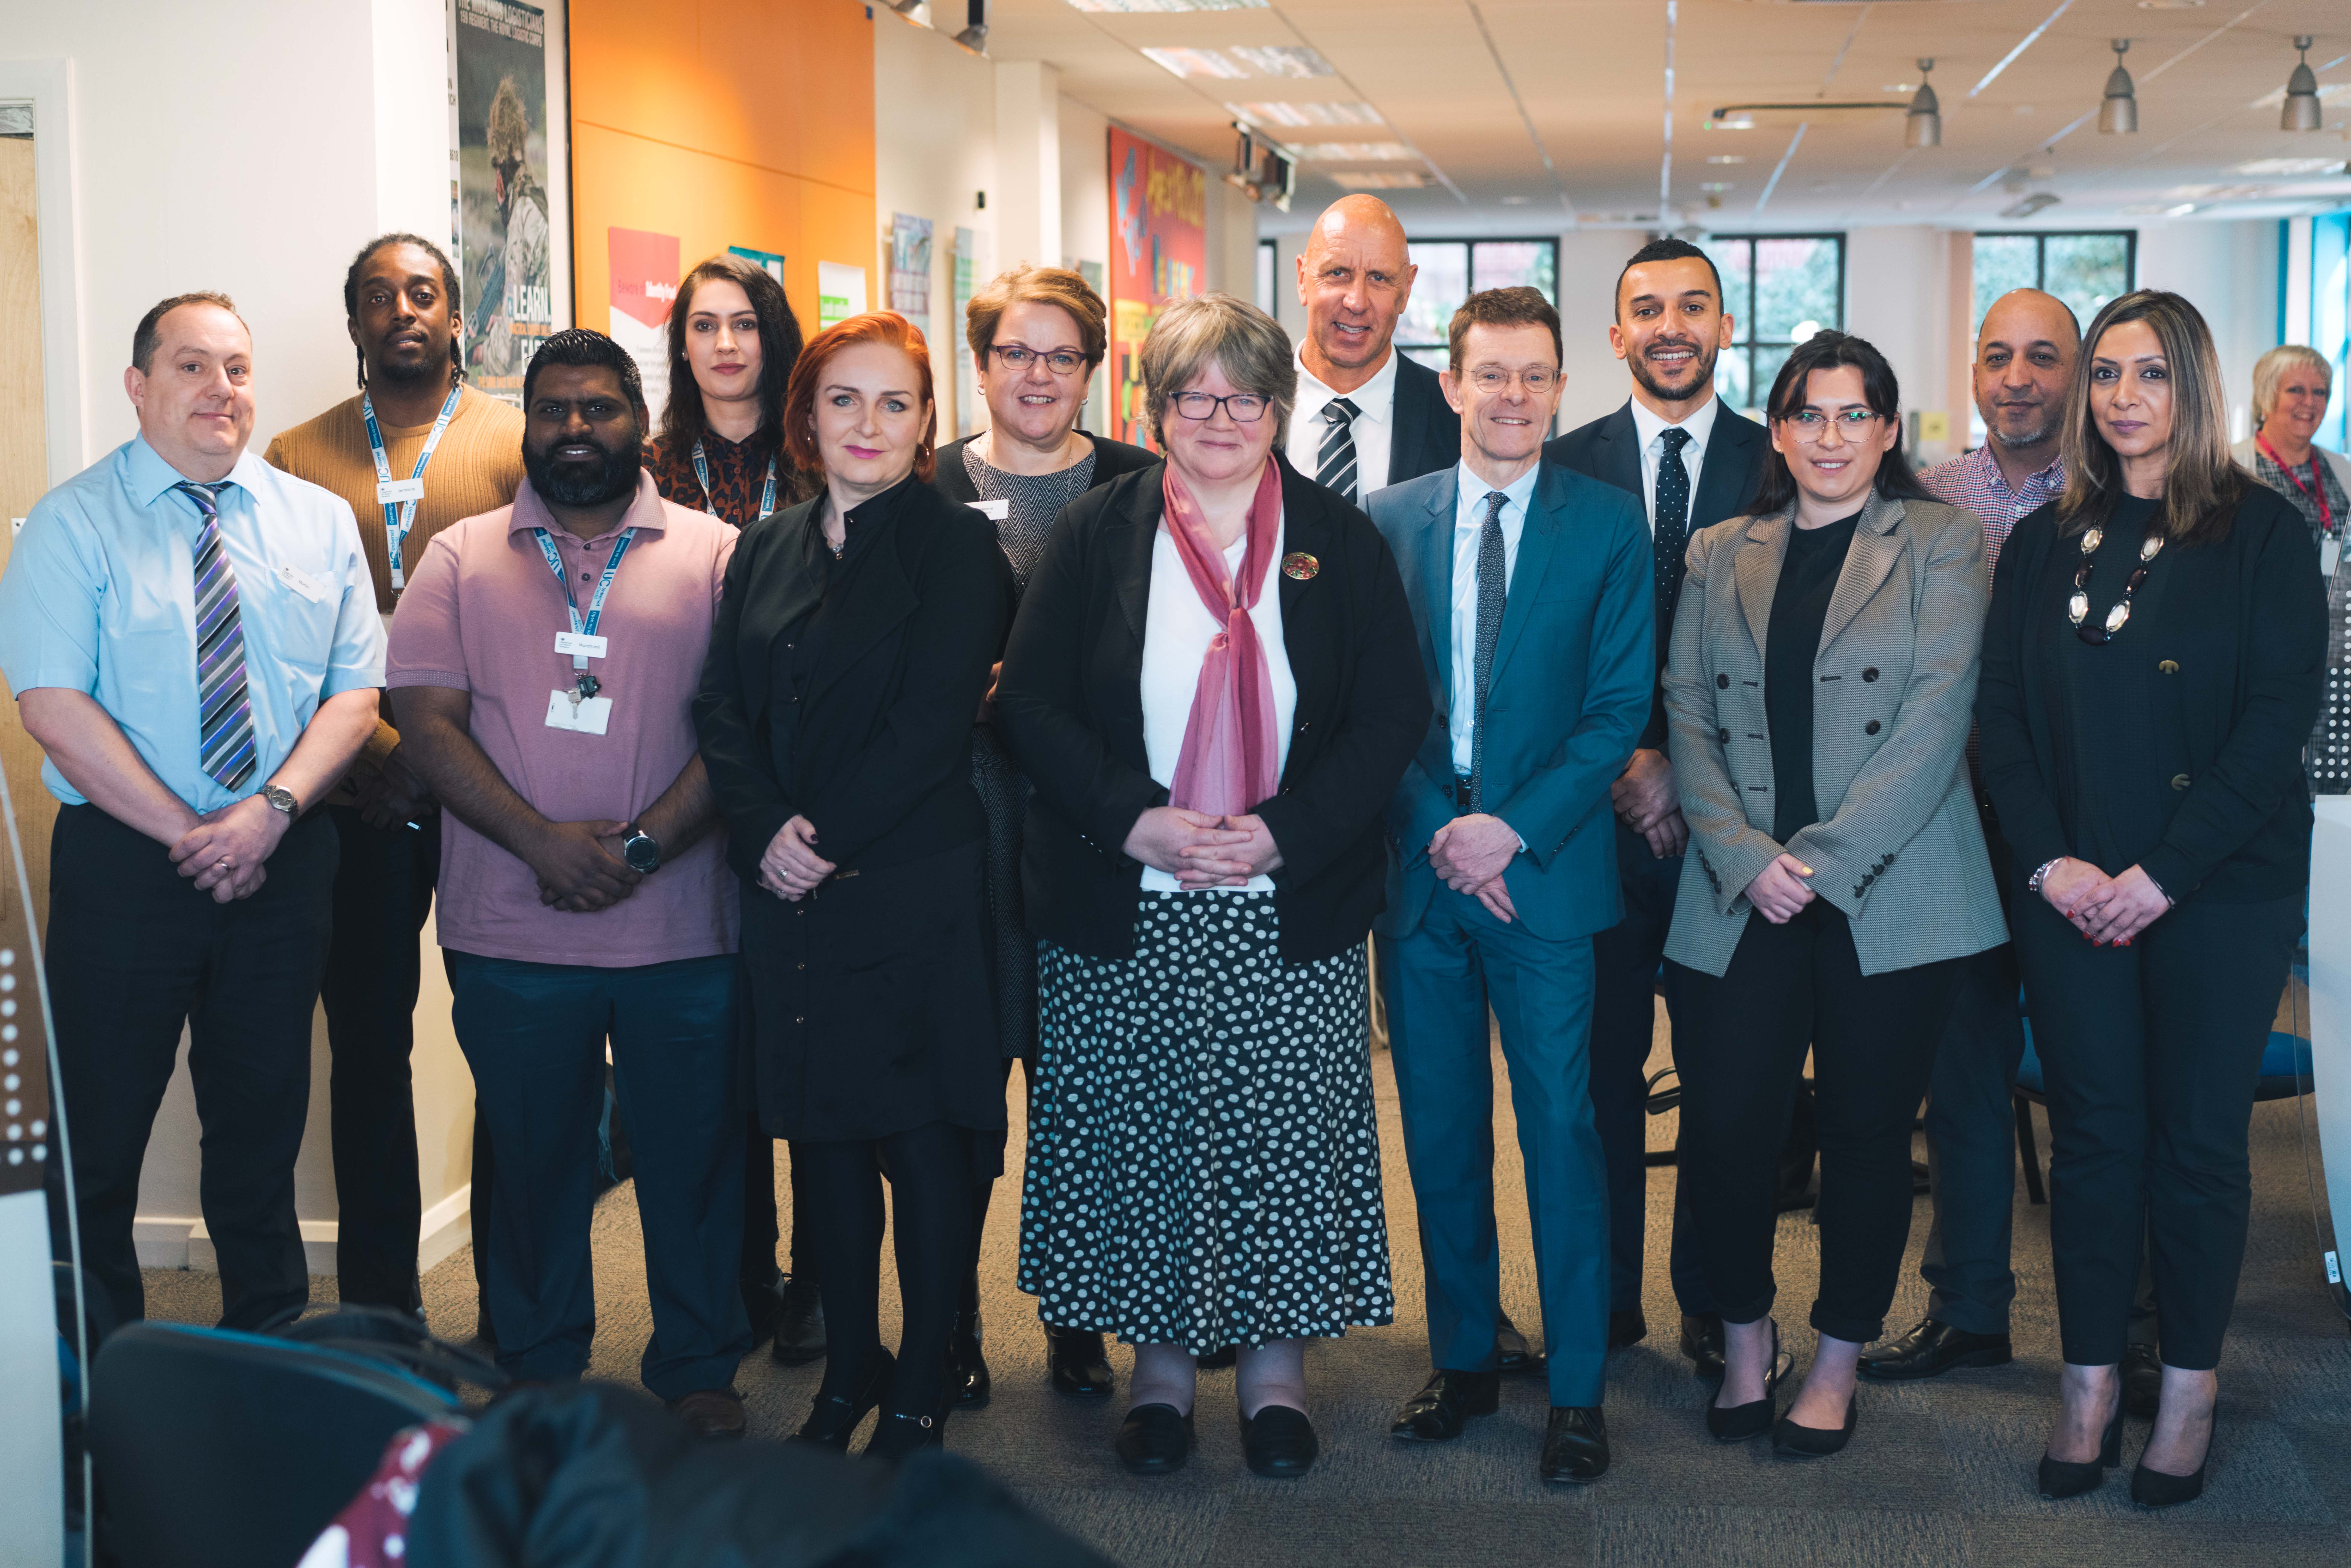 Visiting West Bromwich Jobcentre, (fourth left) Thérèse Coffey, Secretary of State for Work and Pensions, meets (fifth left) Mayor of the West Midlands Andy Street, (sixth left) Nicola Richards MP for West Bromwich East, with youth employability advisors and representatives from Jobcentre Plus and the WMCA